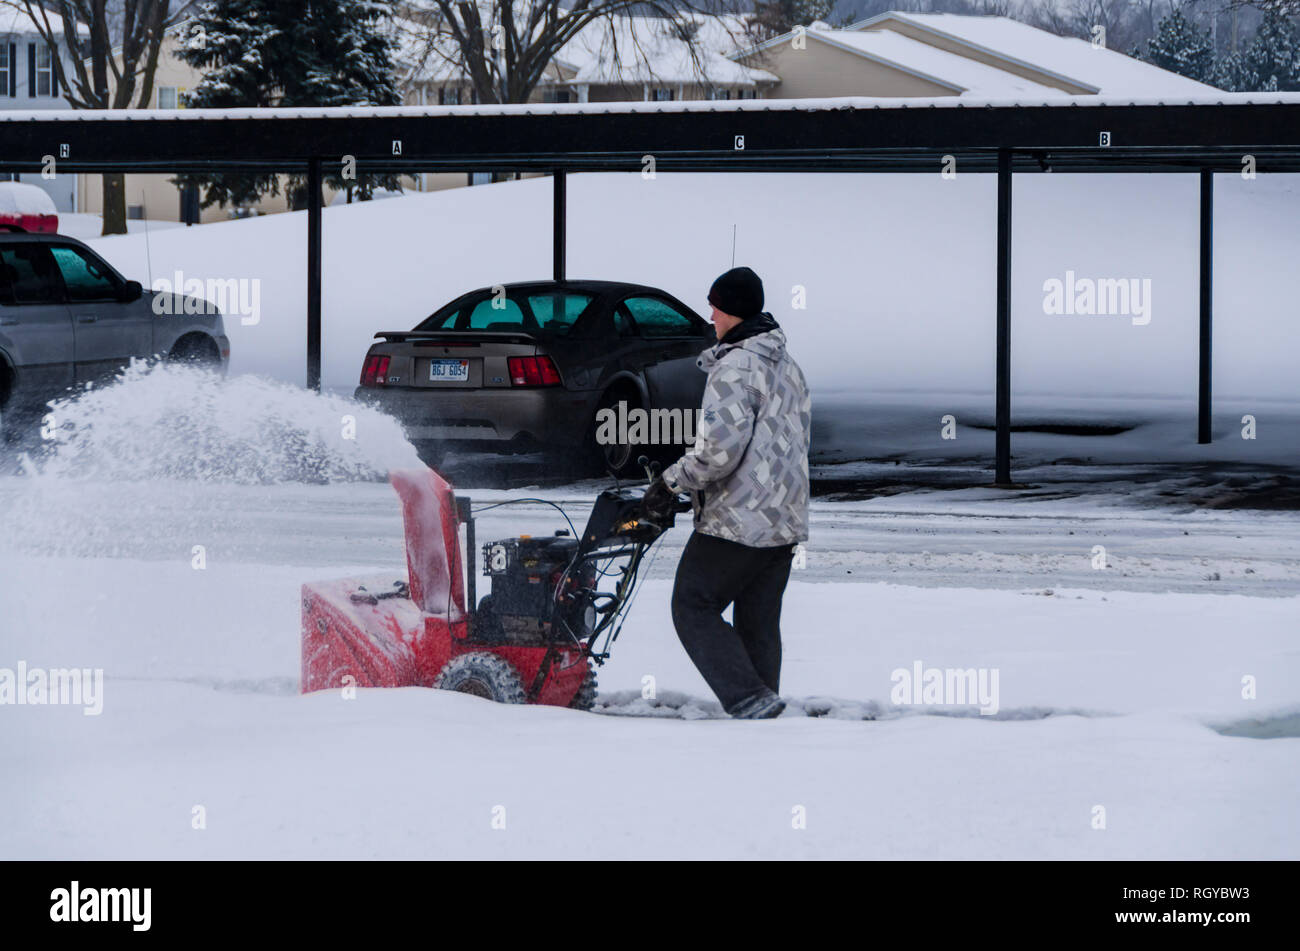 Extreme winter weather! A teenage boy clearing snow from a sidewalk with a mechanical snow blower after a winter storm in Michigan, USA. Stock Photo